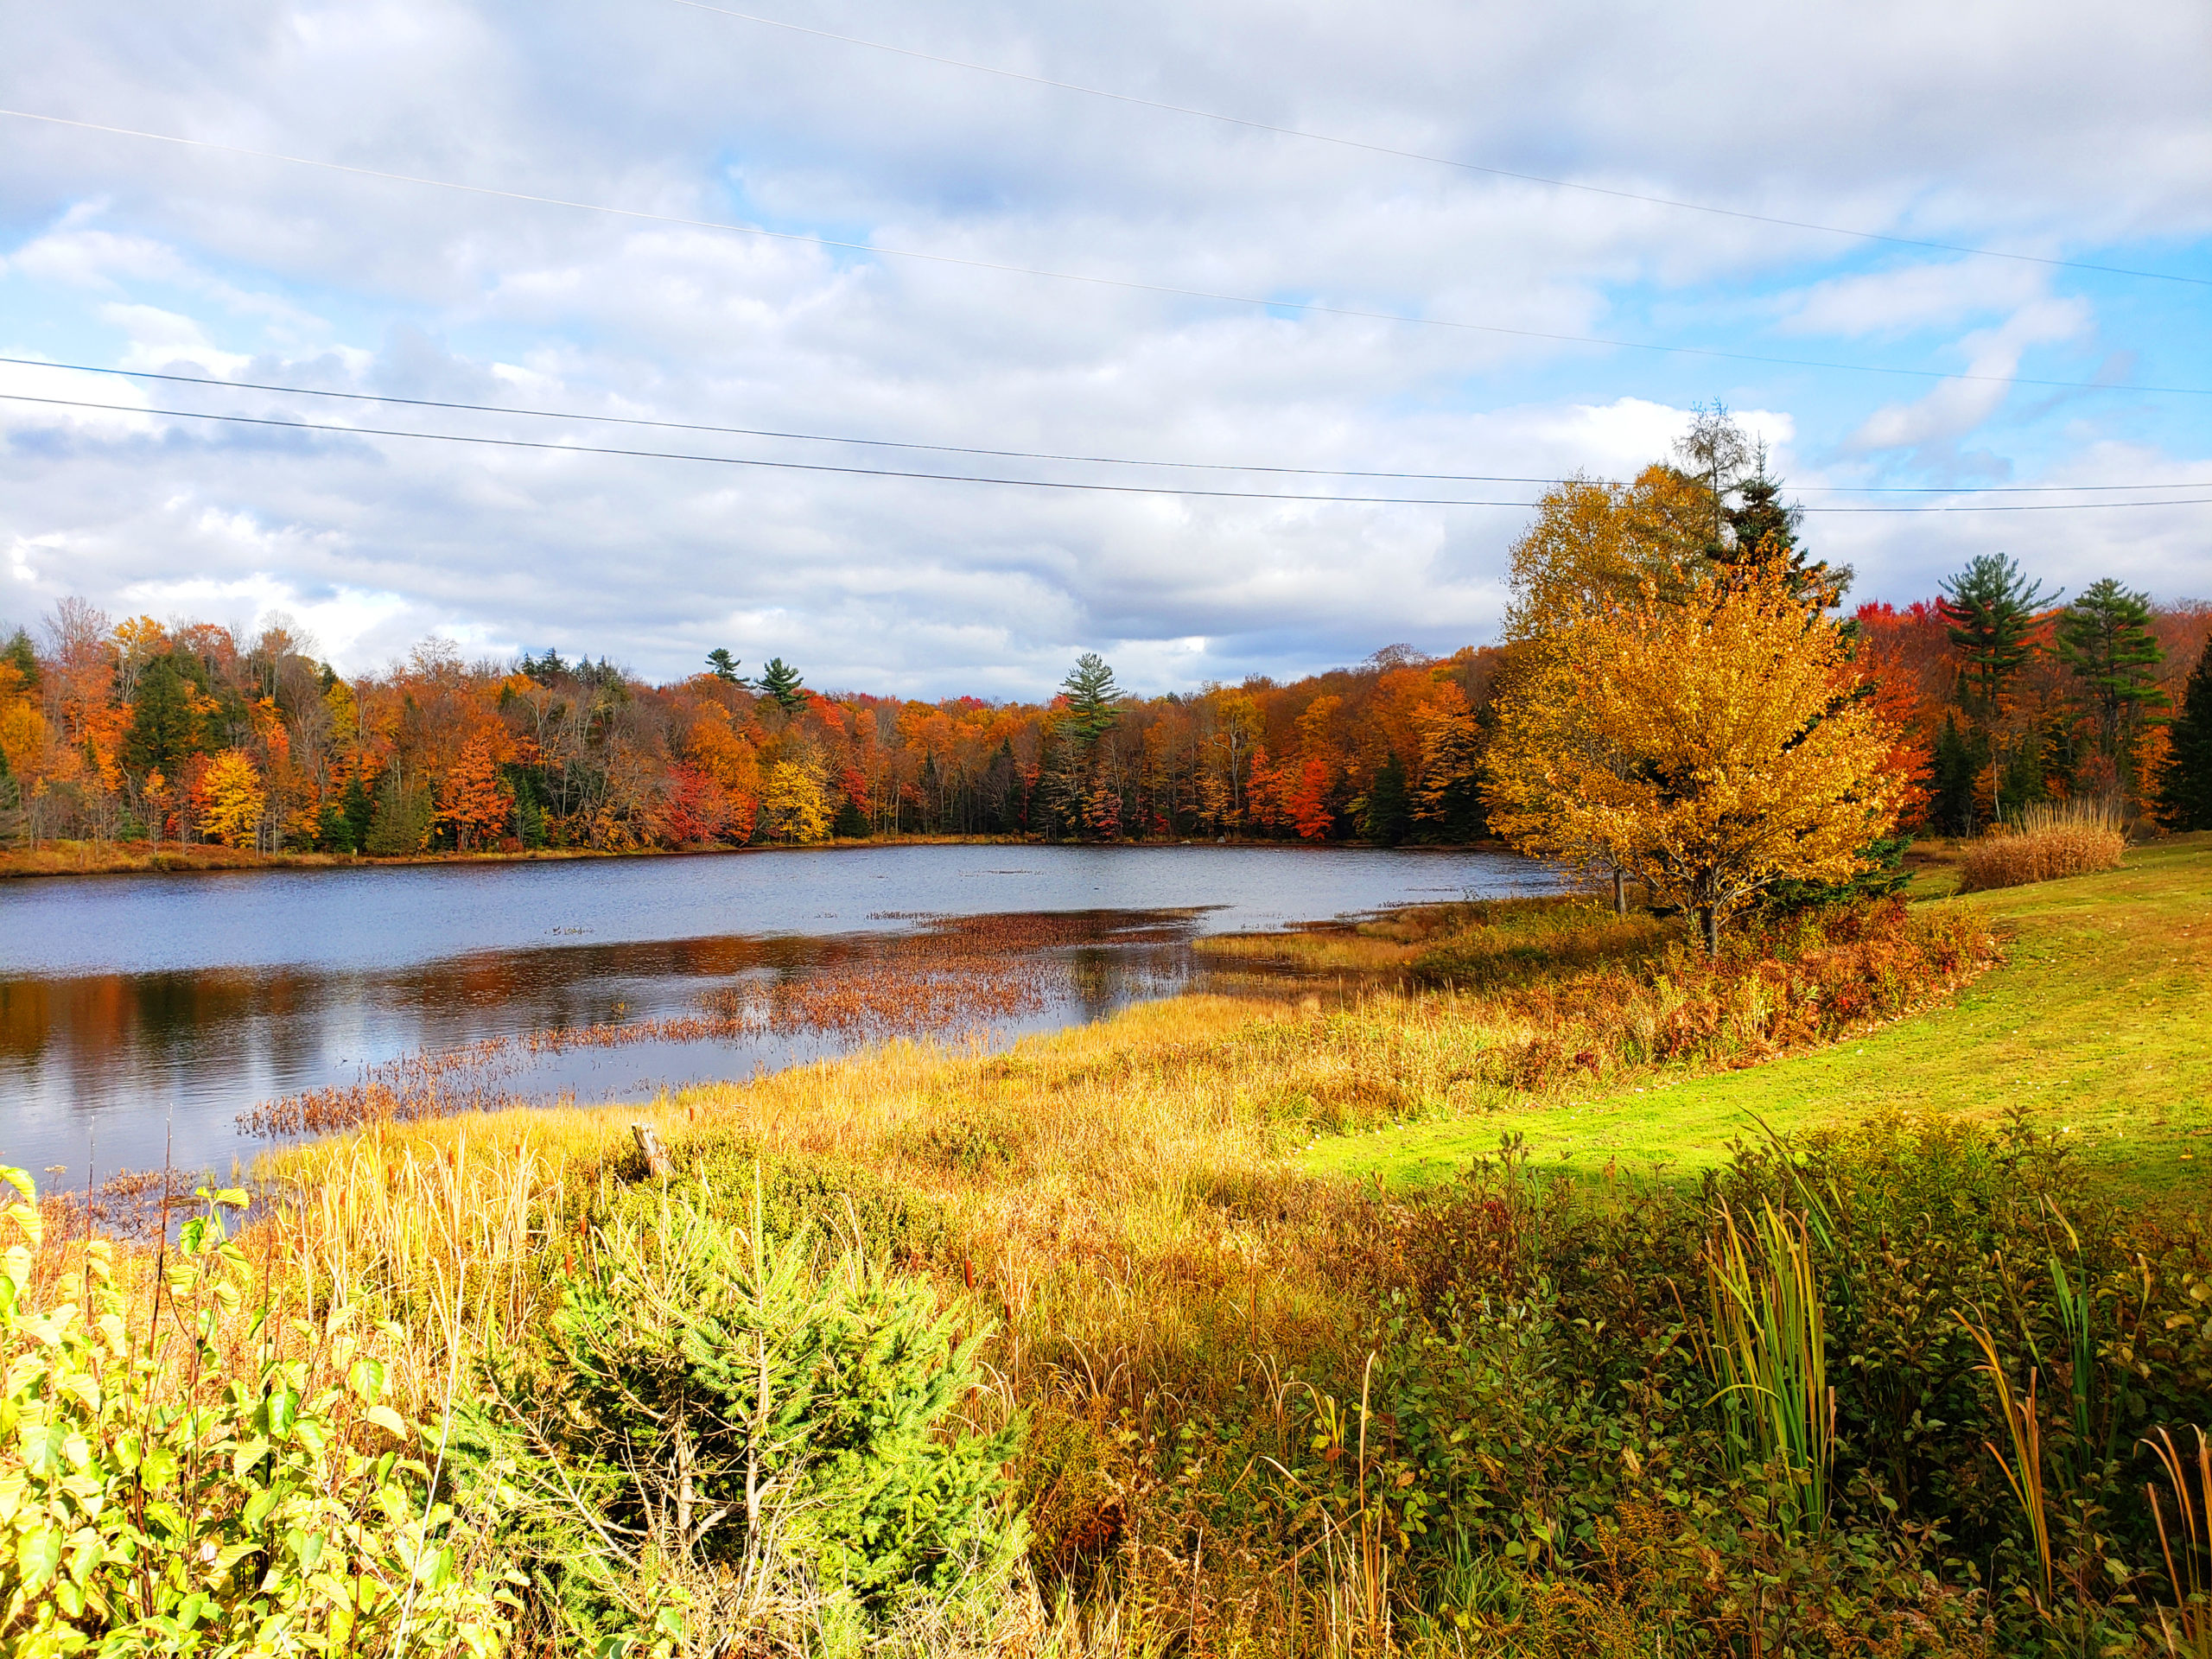 25 Photos Proving That Ontario, Canada Is The Best Place To View Autumn Leaves